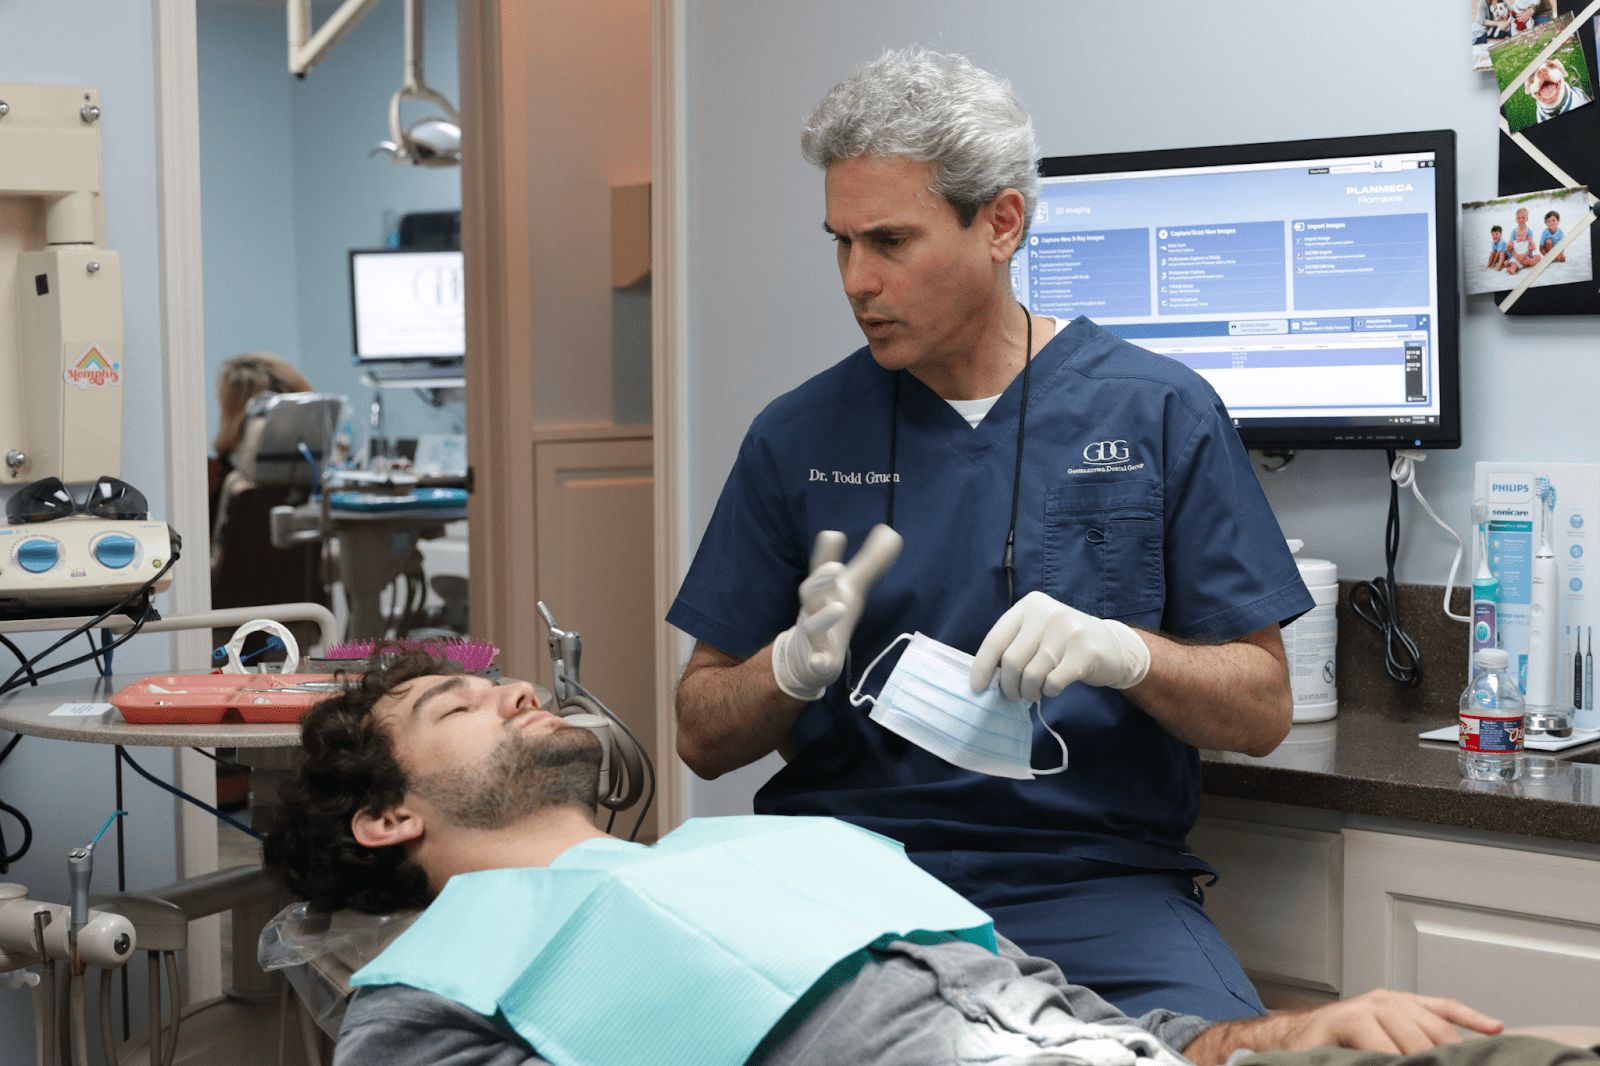 Dr. John Whittemore and Dr. Todd Gruen share information on cavities, so read to learn all about the most common causes of cavities.